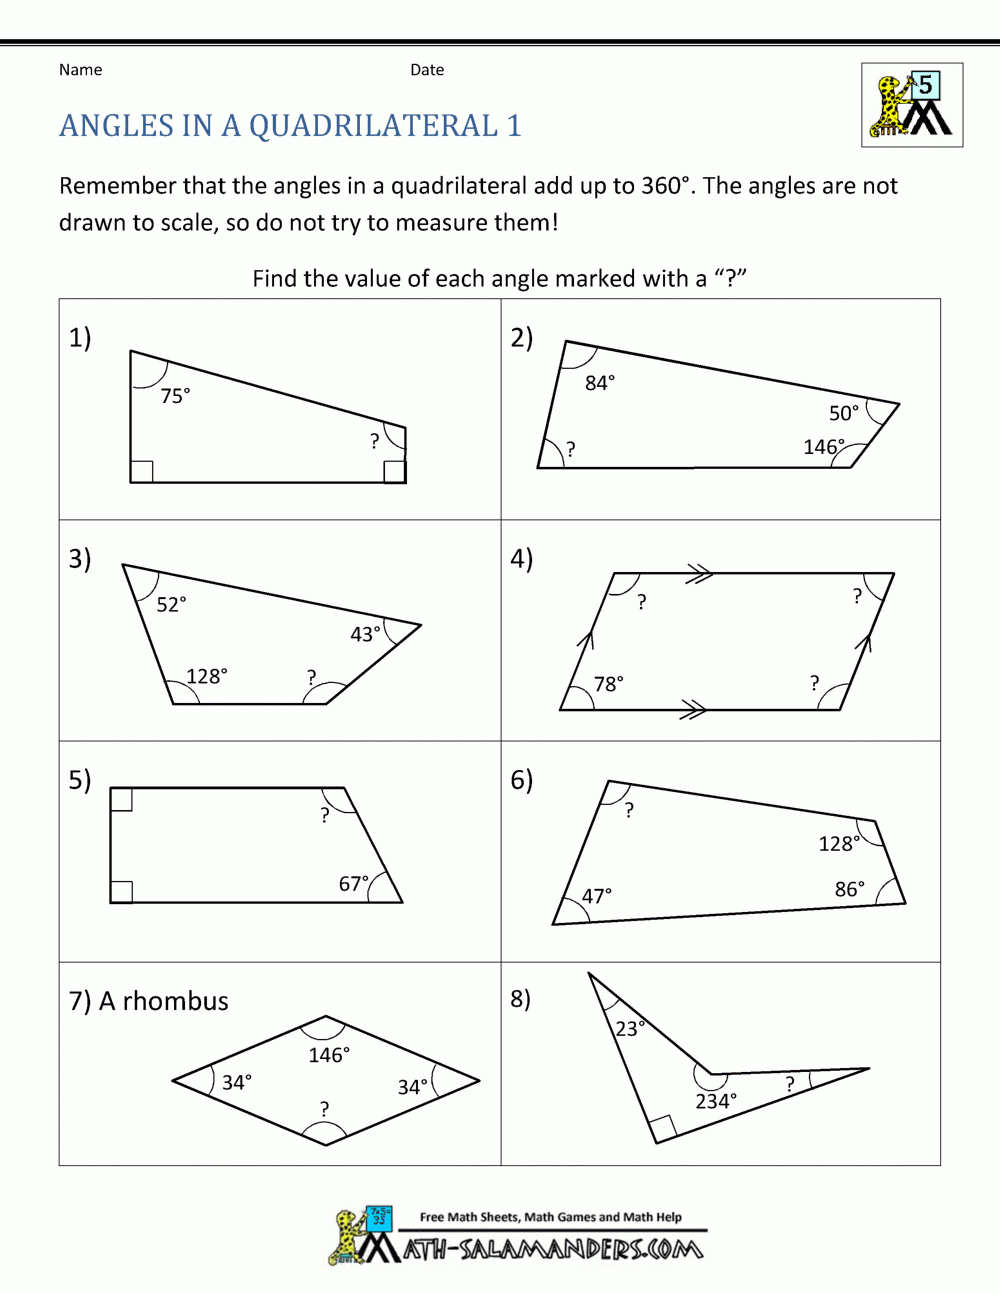 5Th Grade Geometry For Finding Missing Angles Worksheet